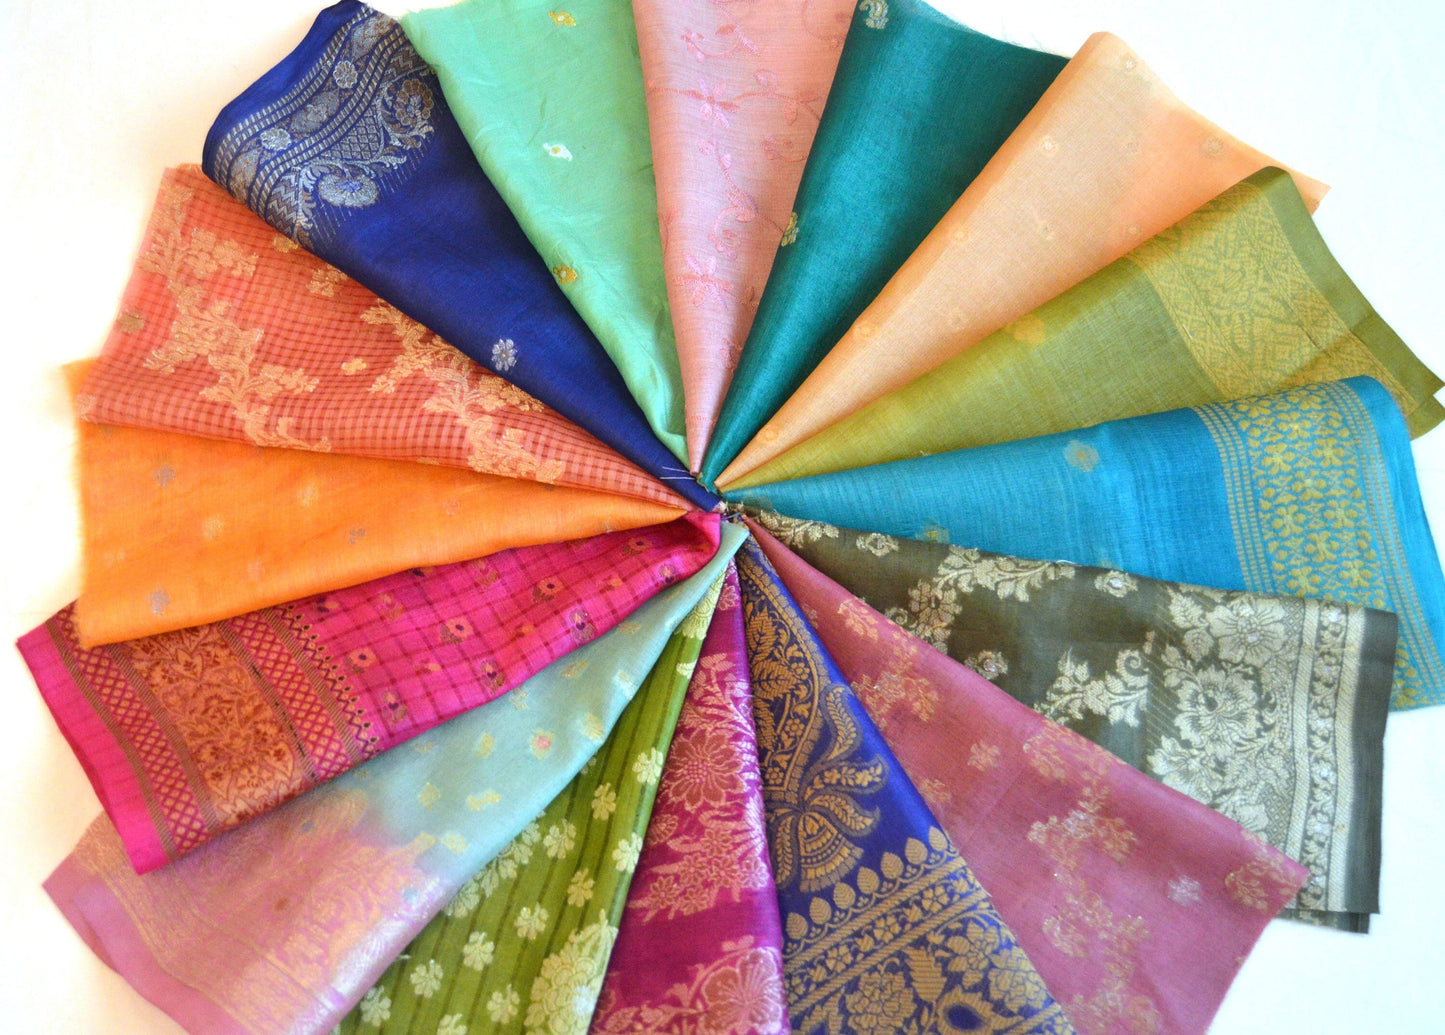 5 Inch x 16 Pieces Mixed Colour Upcycled Sari Silk Craft Fabric Card Making Collage Mixed Media Textile Art Sewing Junk Journals